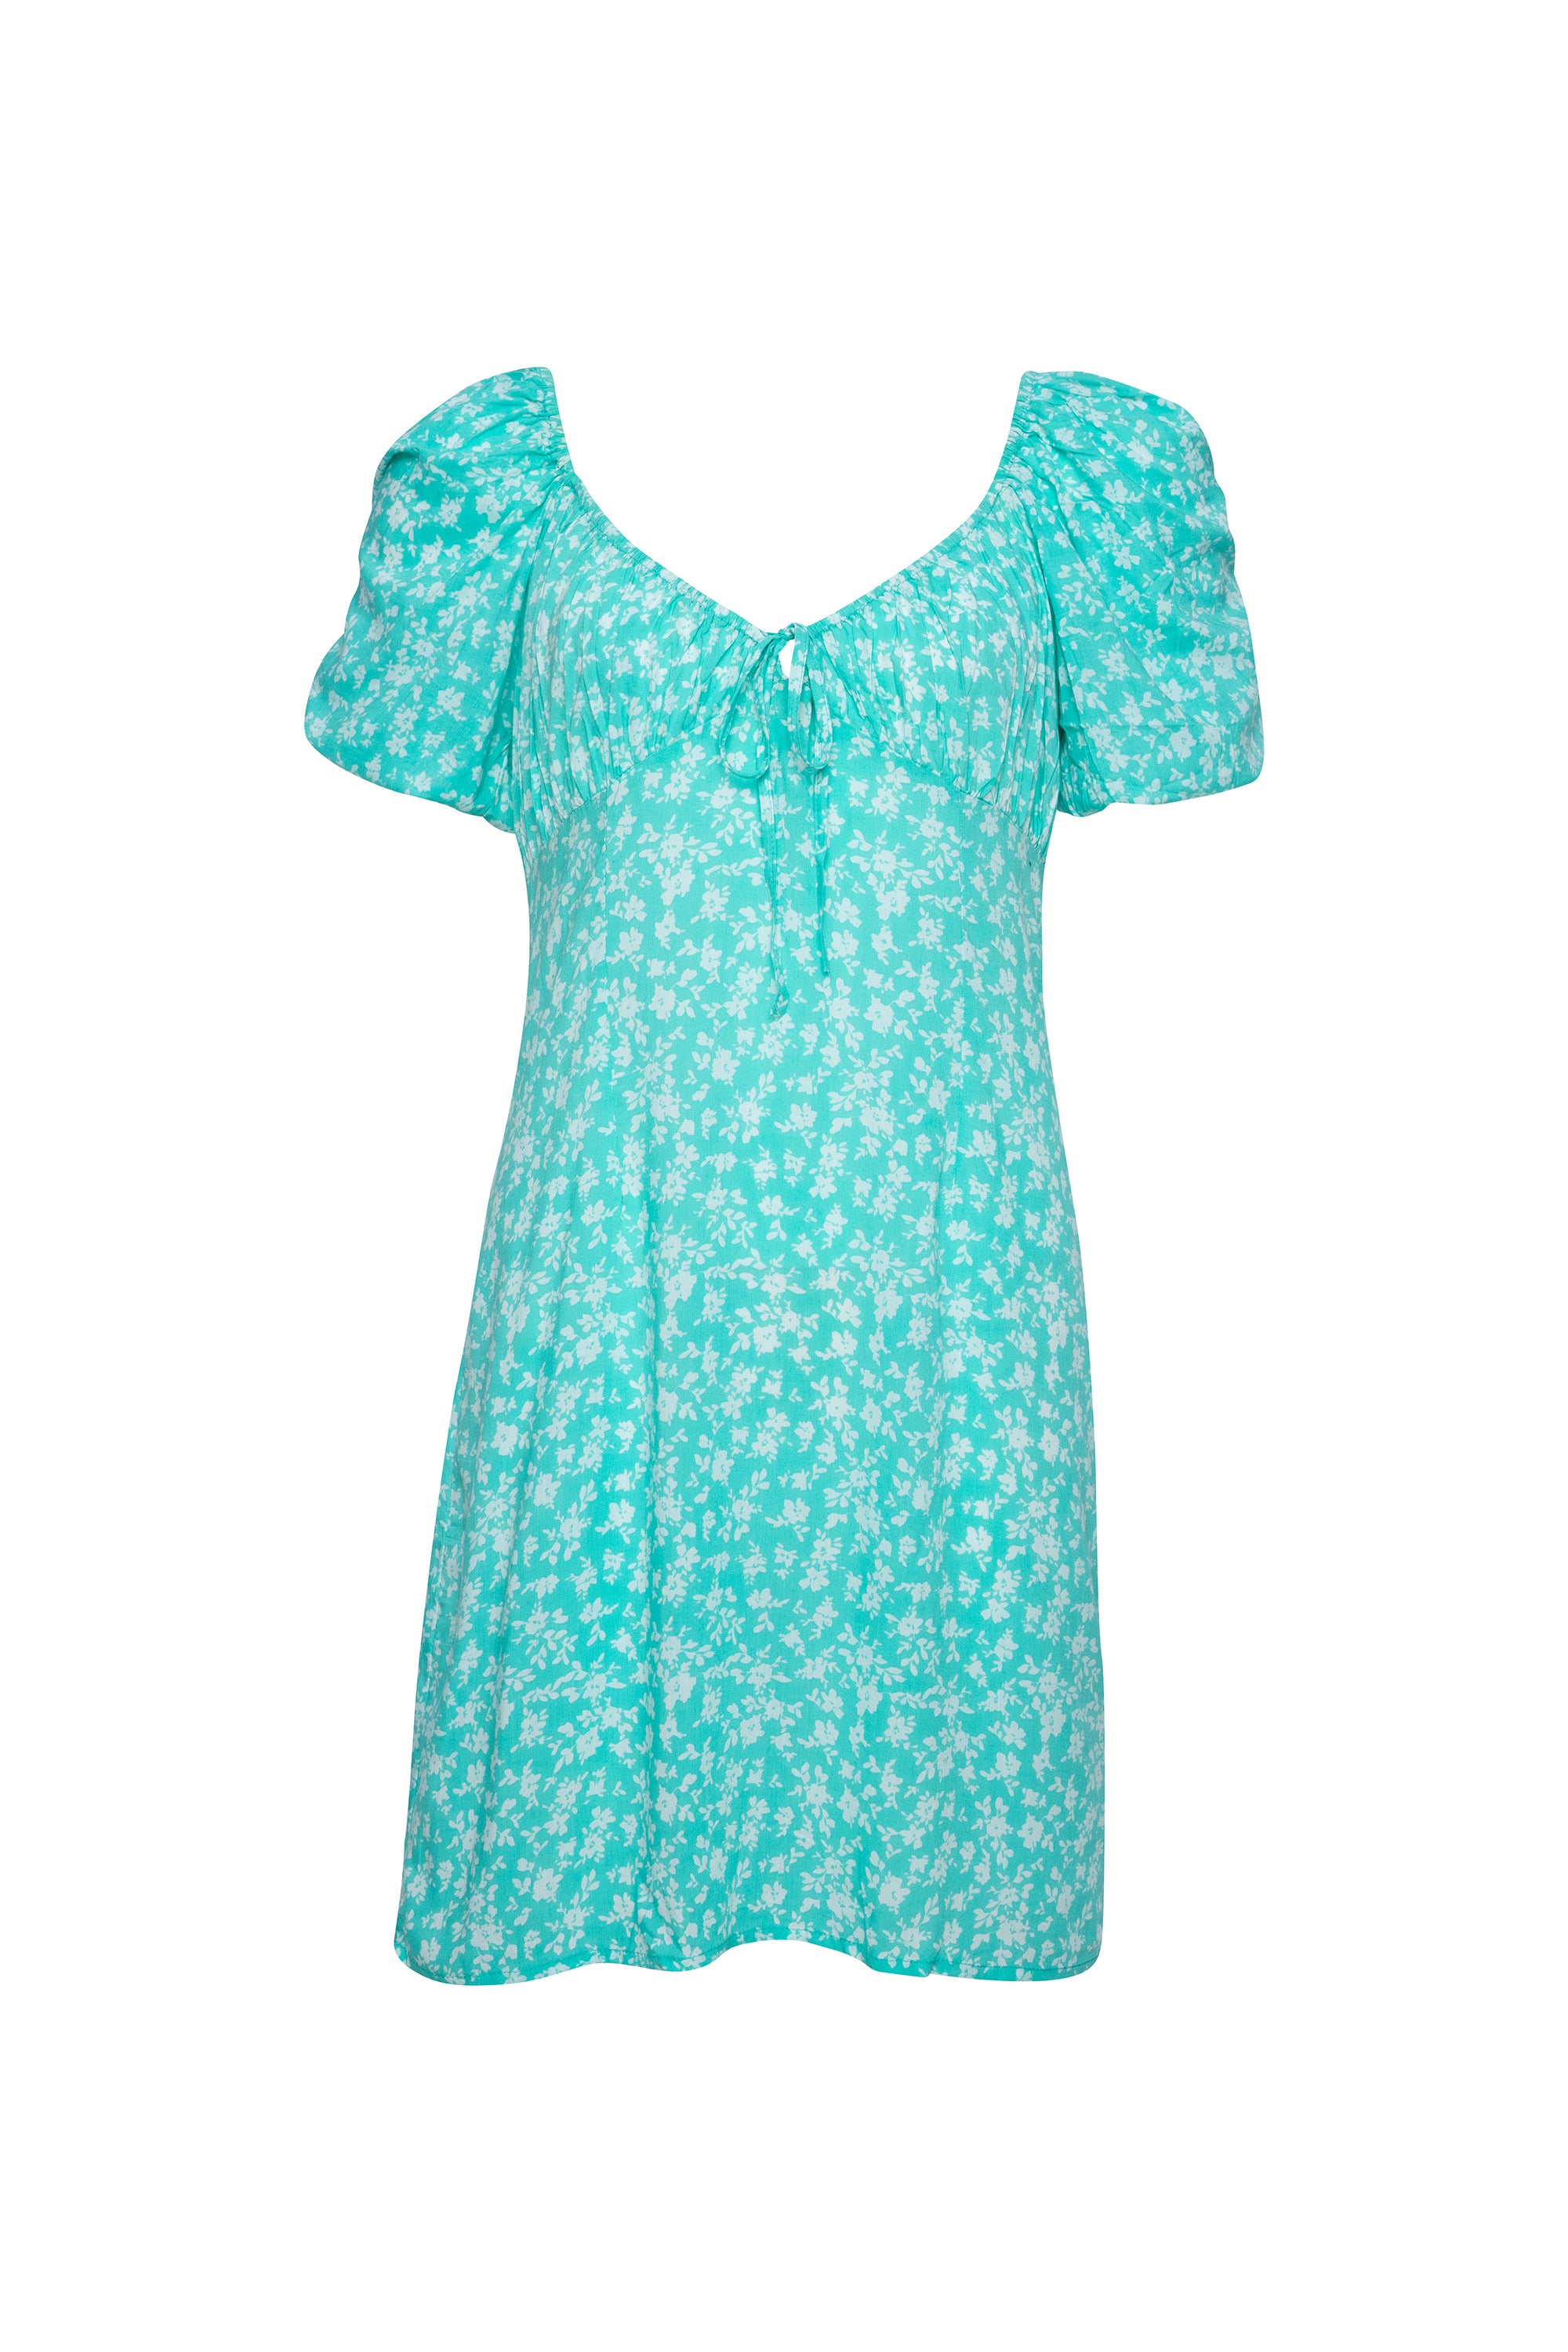 Turquoise Ditsy Floral Mini Dress